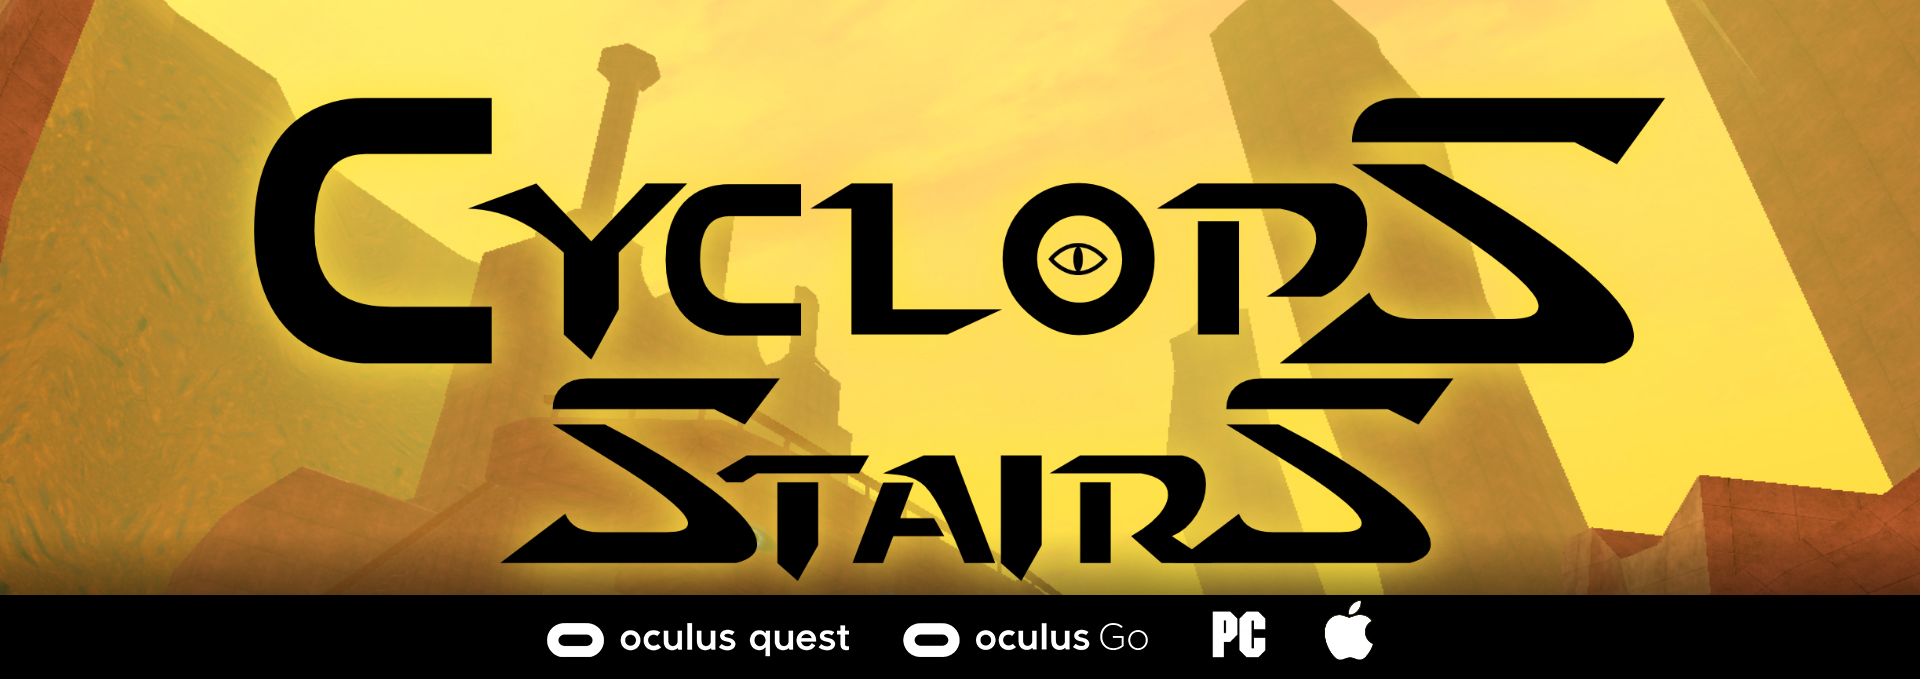 CYCLOPS STAIRS